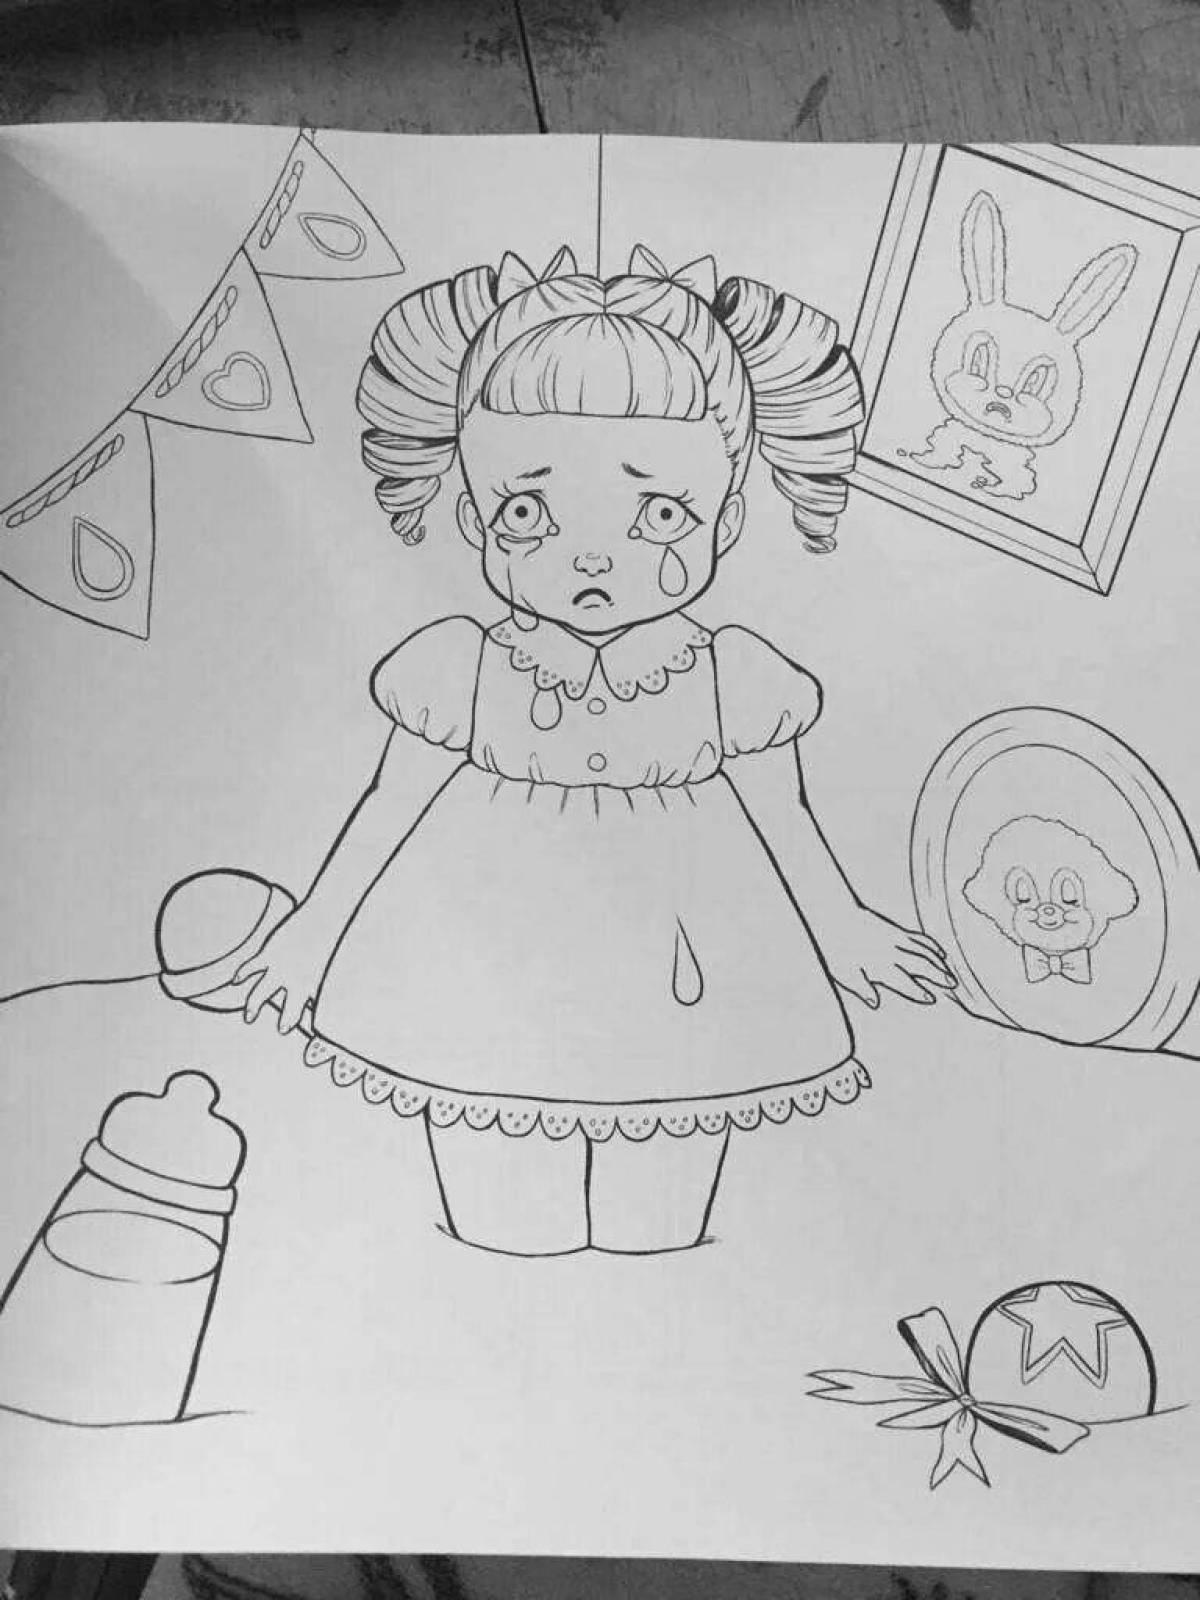 Living crybaby coloring